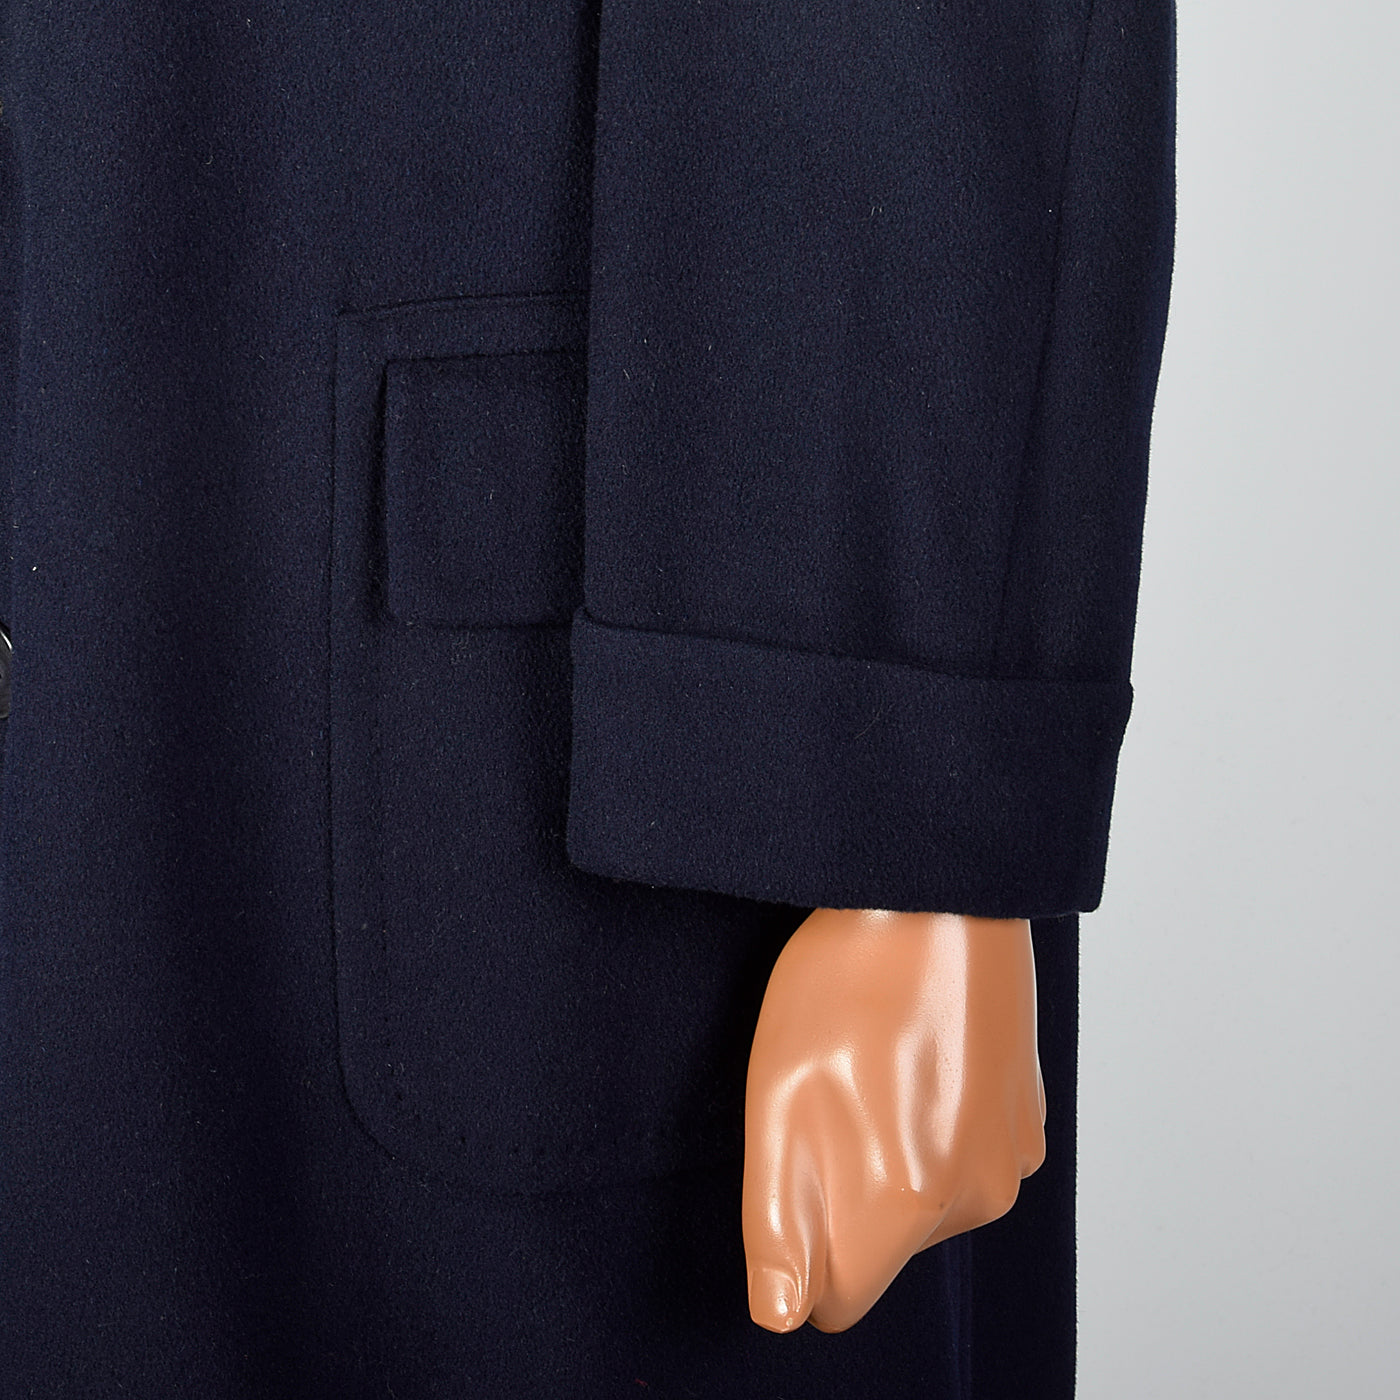 1950s Mens Wool and Cashmere Blend Navy Coat